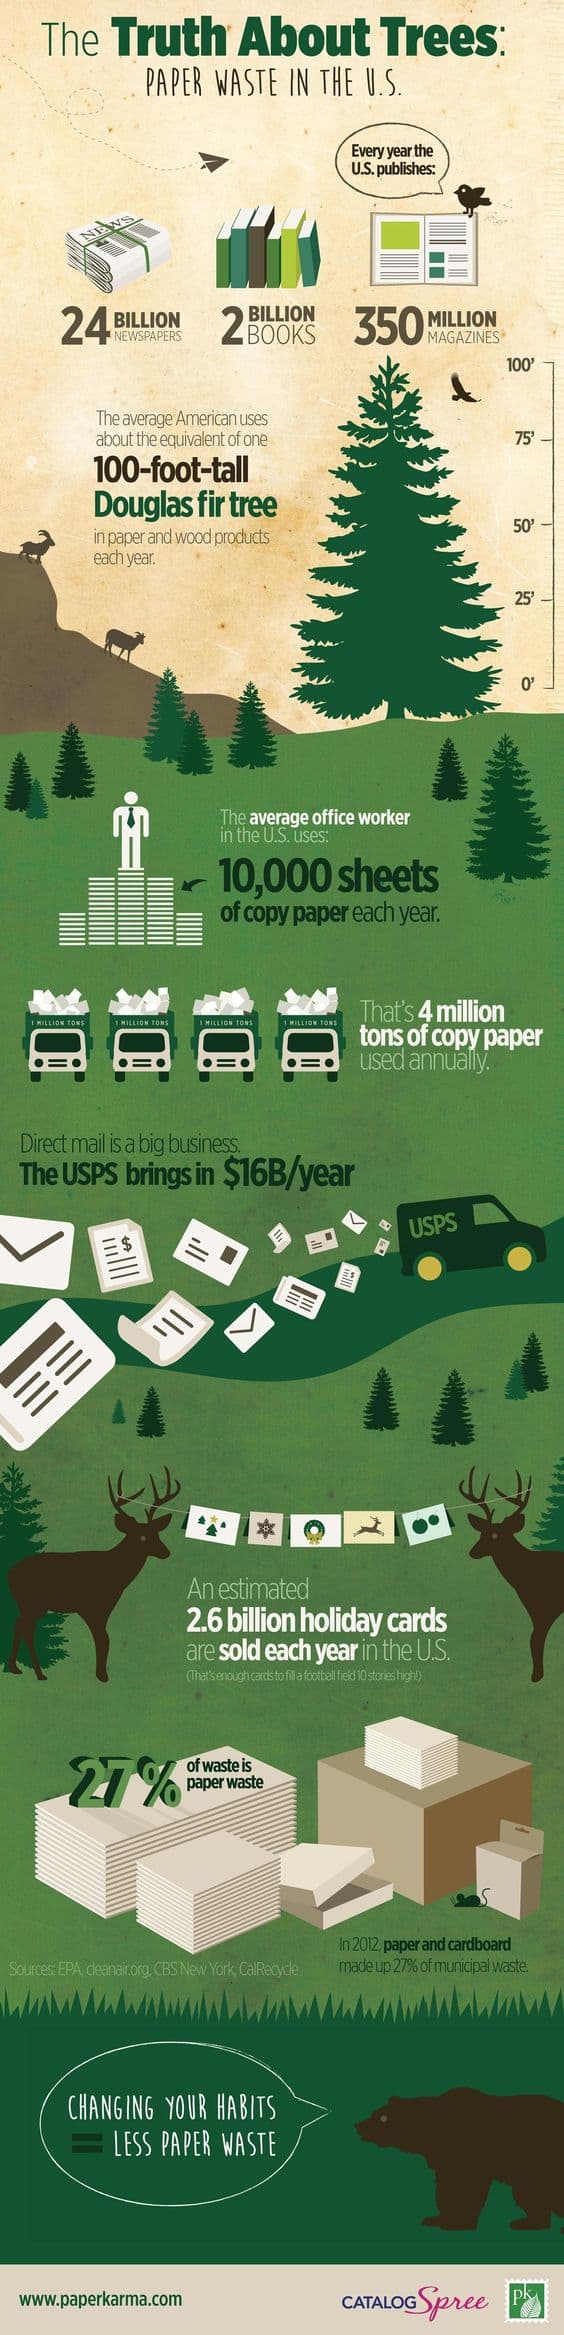 learn more about how much paper is wasted in the U.S.